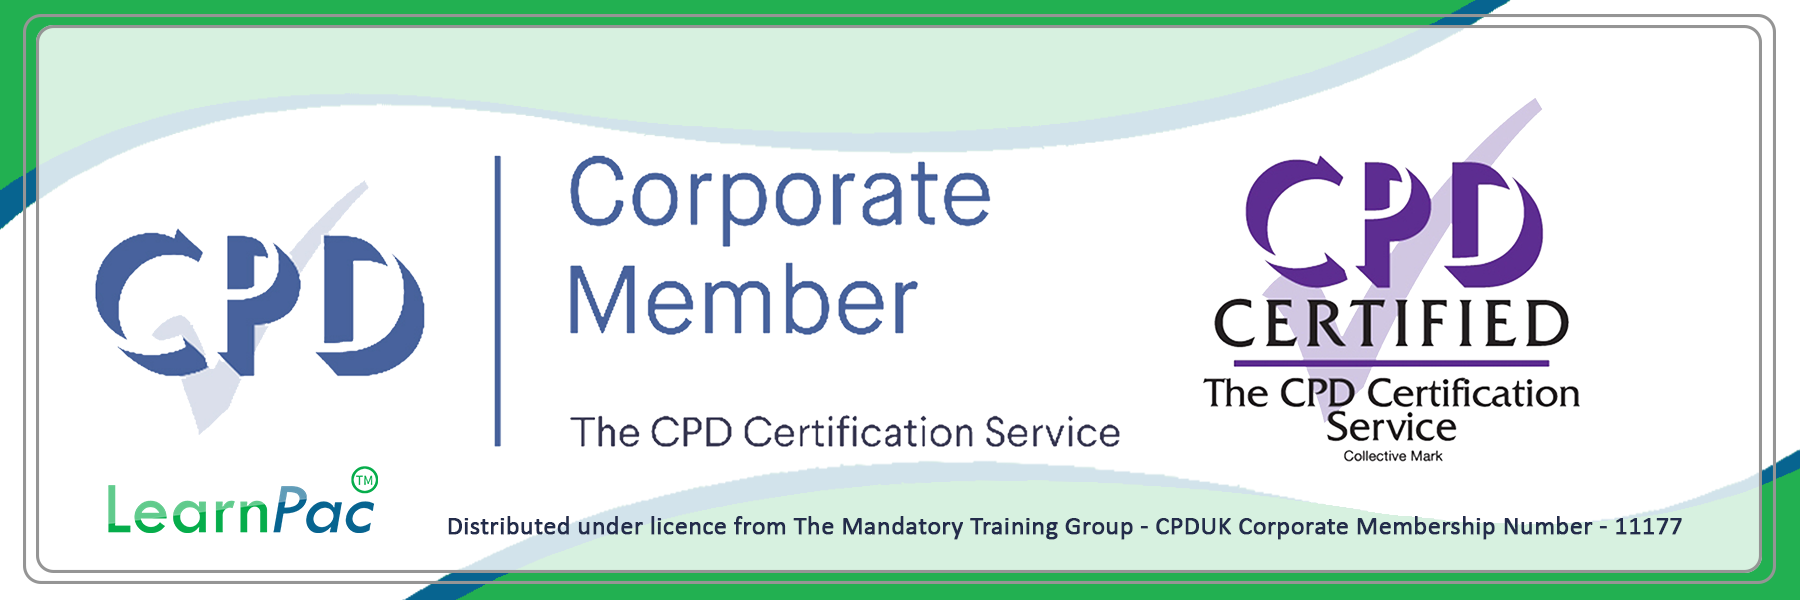 Health and Safety Mandatory Training - E-Learning Courses with Certificates - CPD Certified - LearnPac Systems UK -